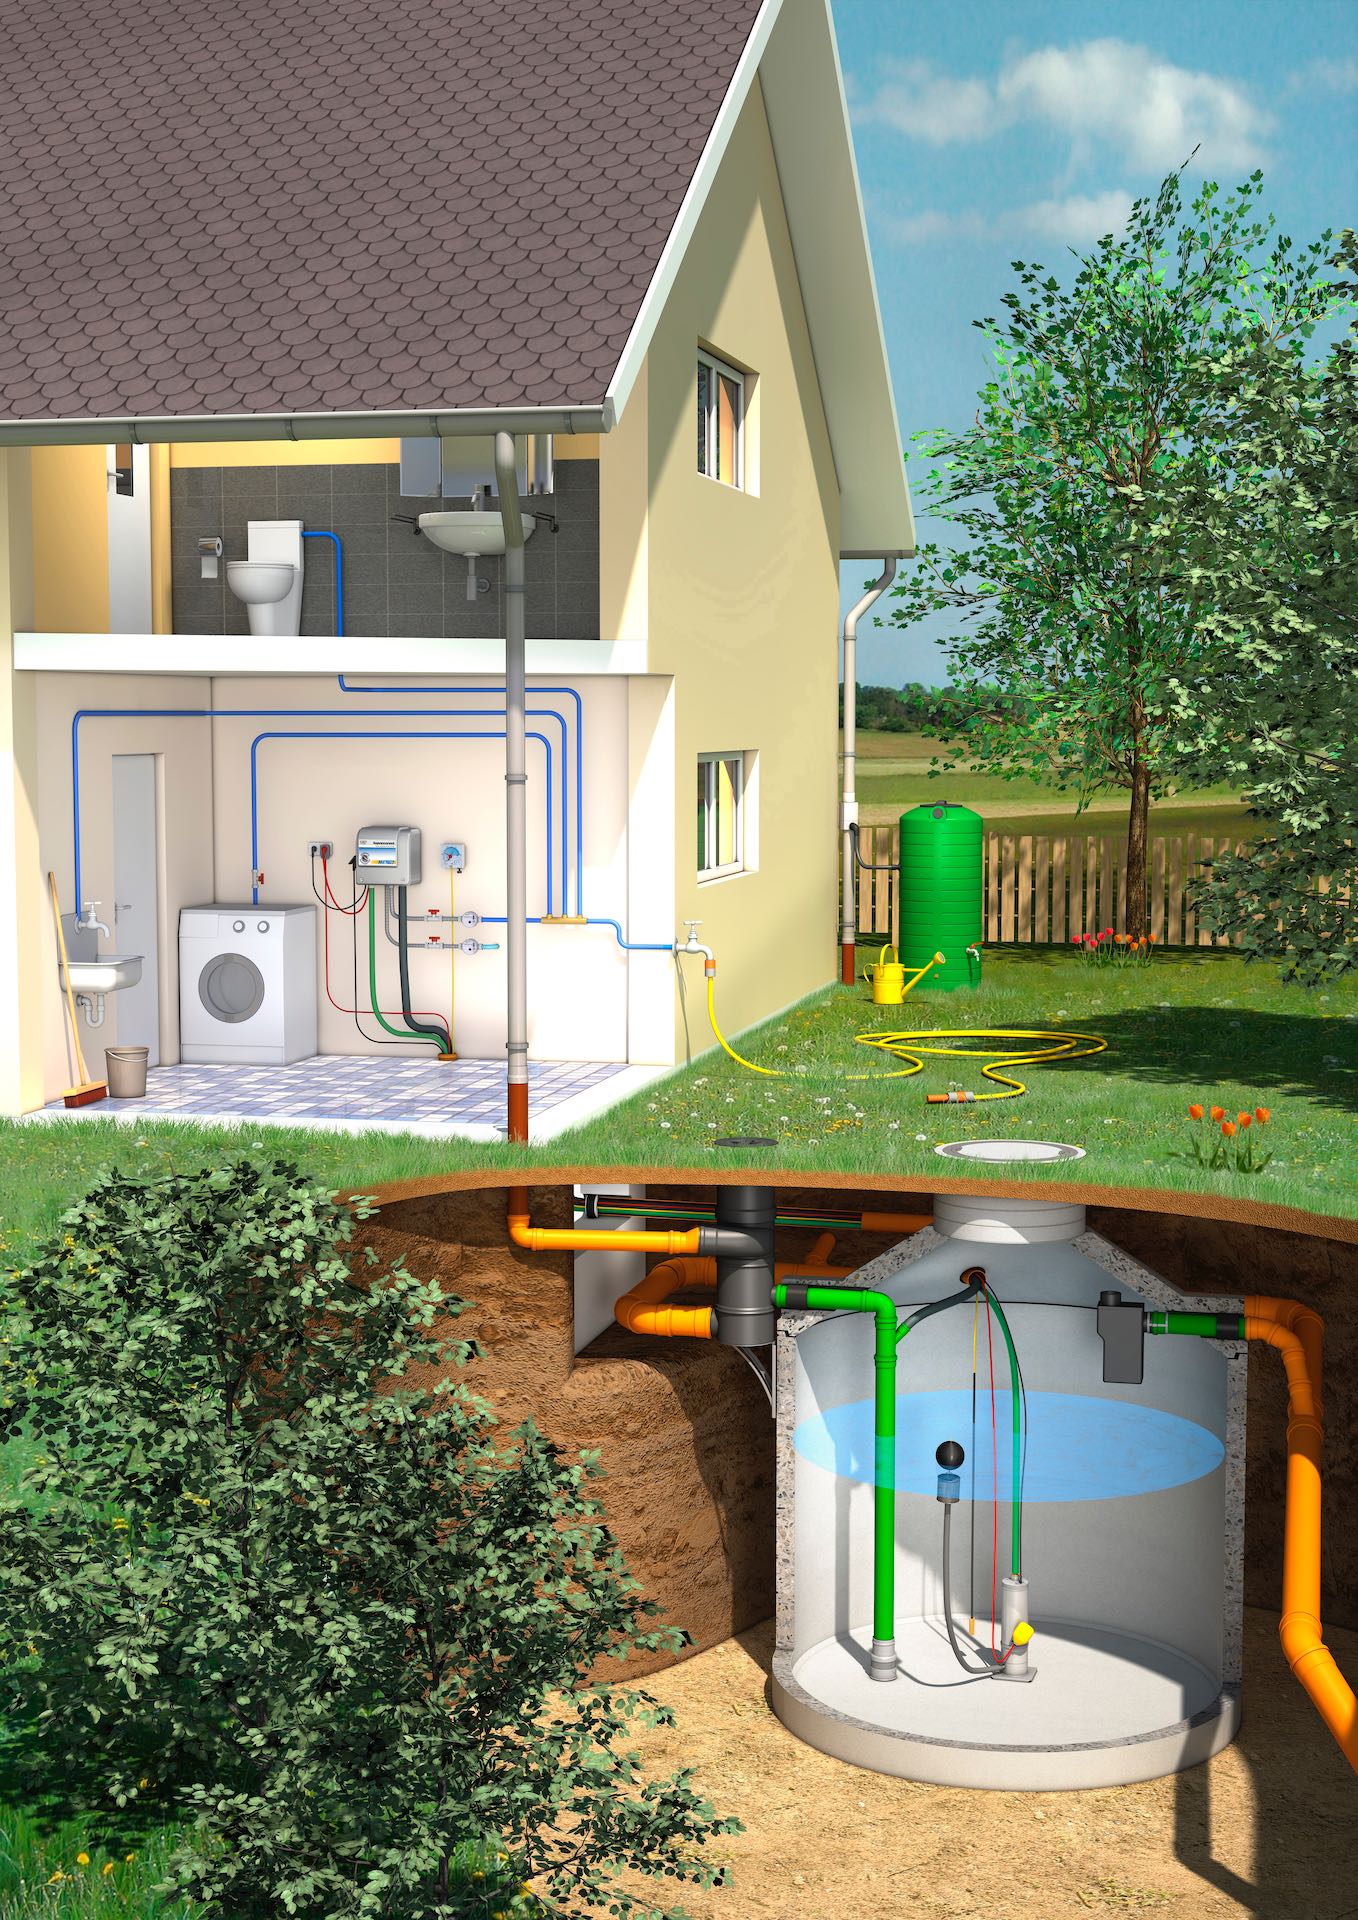 The setup of a rainwater system